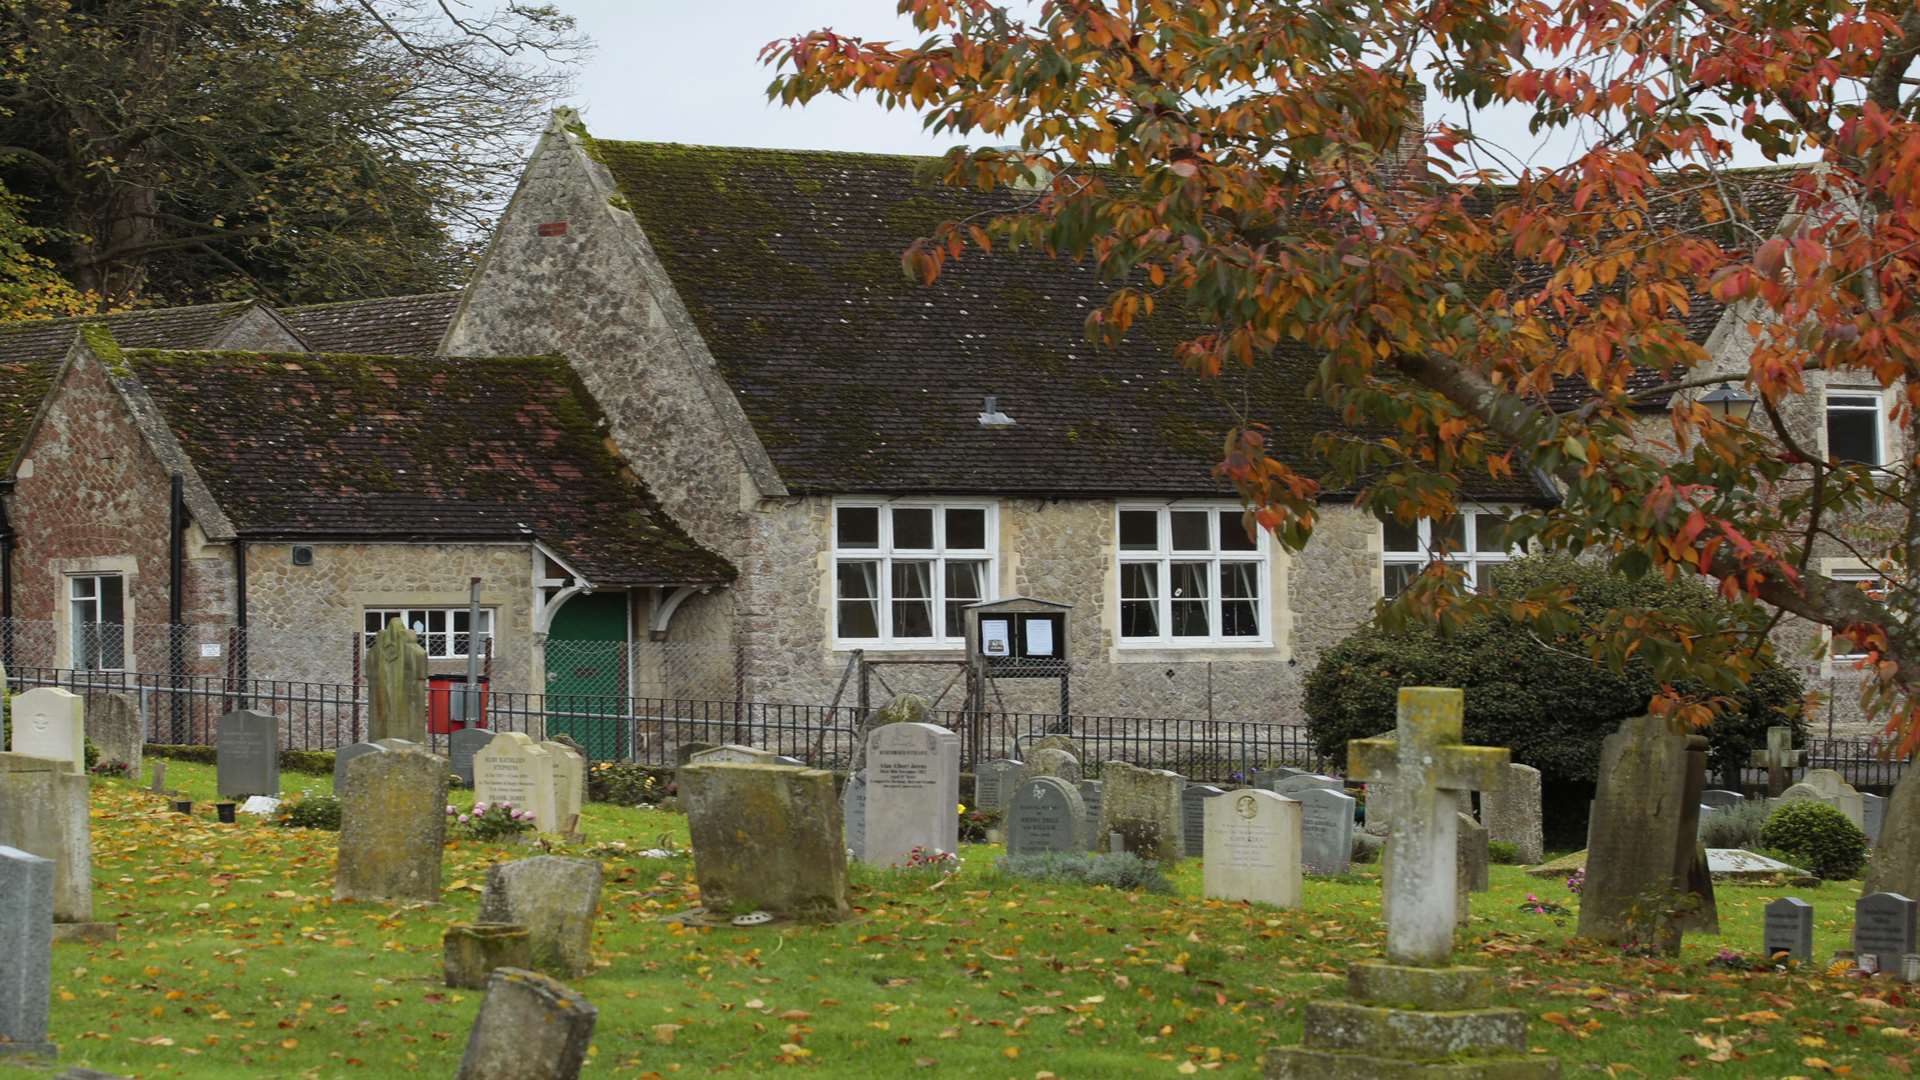 St Mary's Church Centre in West Malling